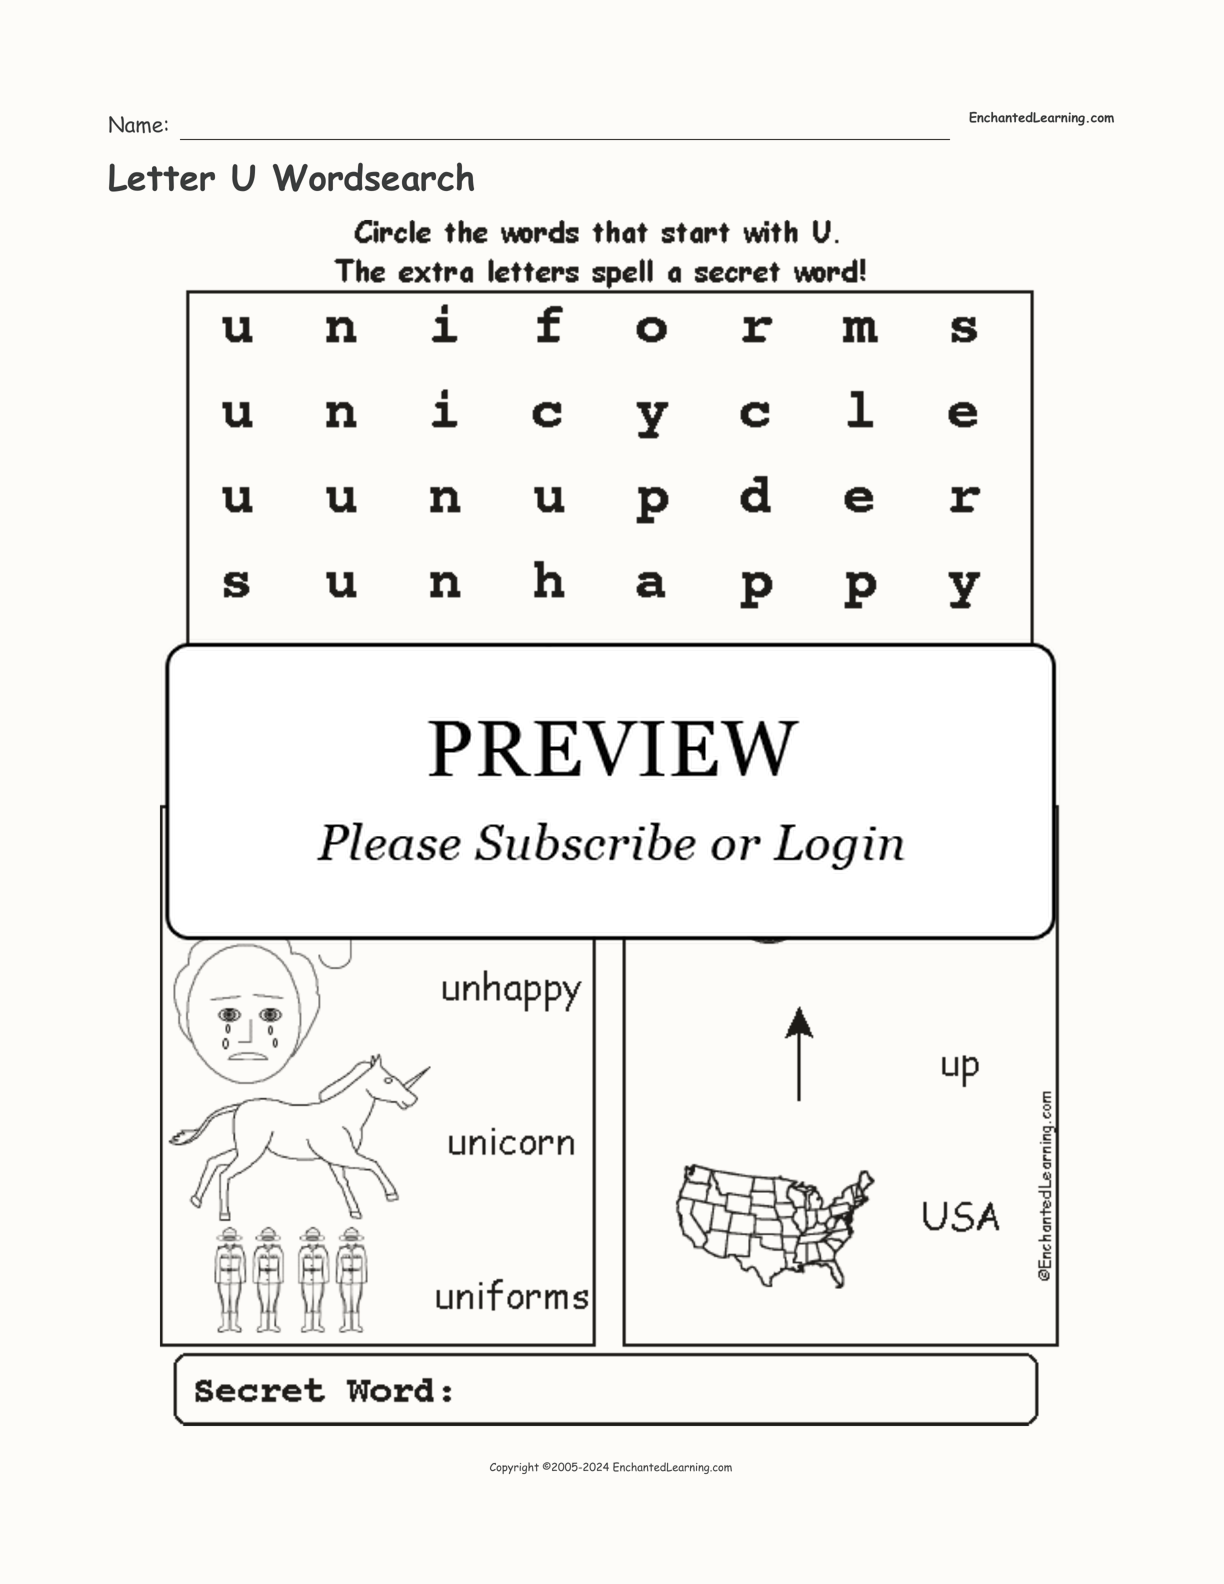 Letter U Wordsearch interactive worksheet page 1